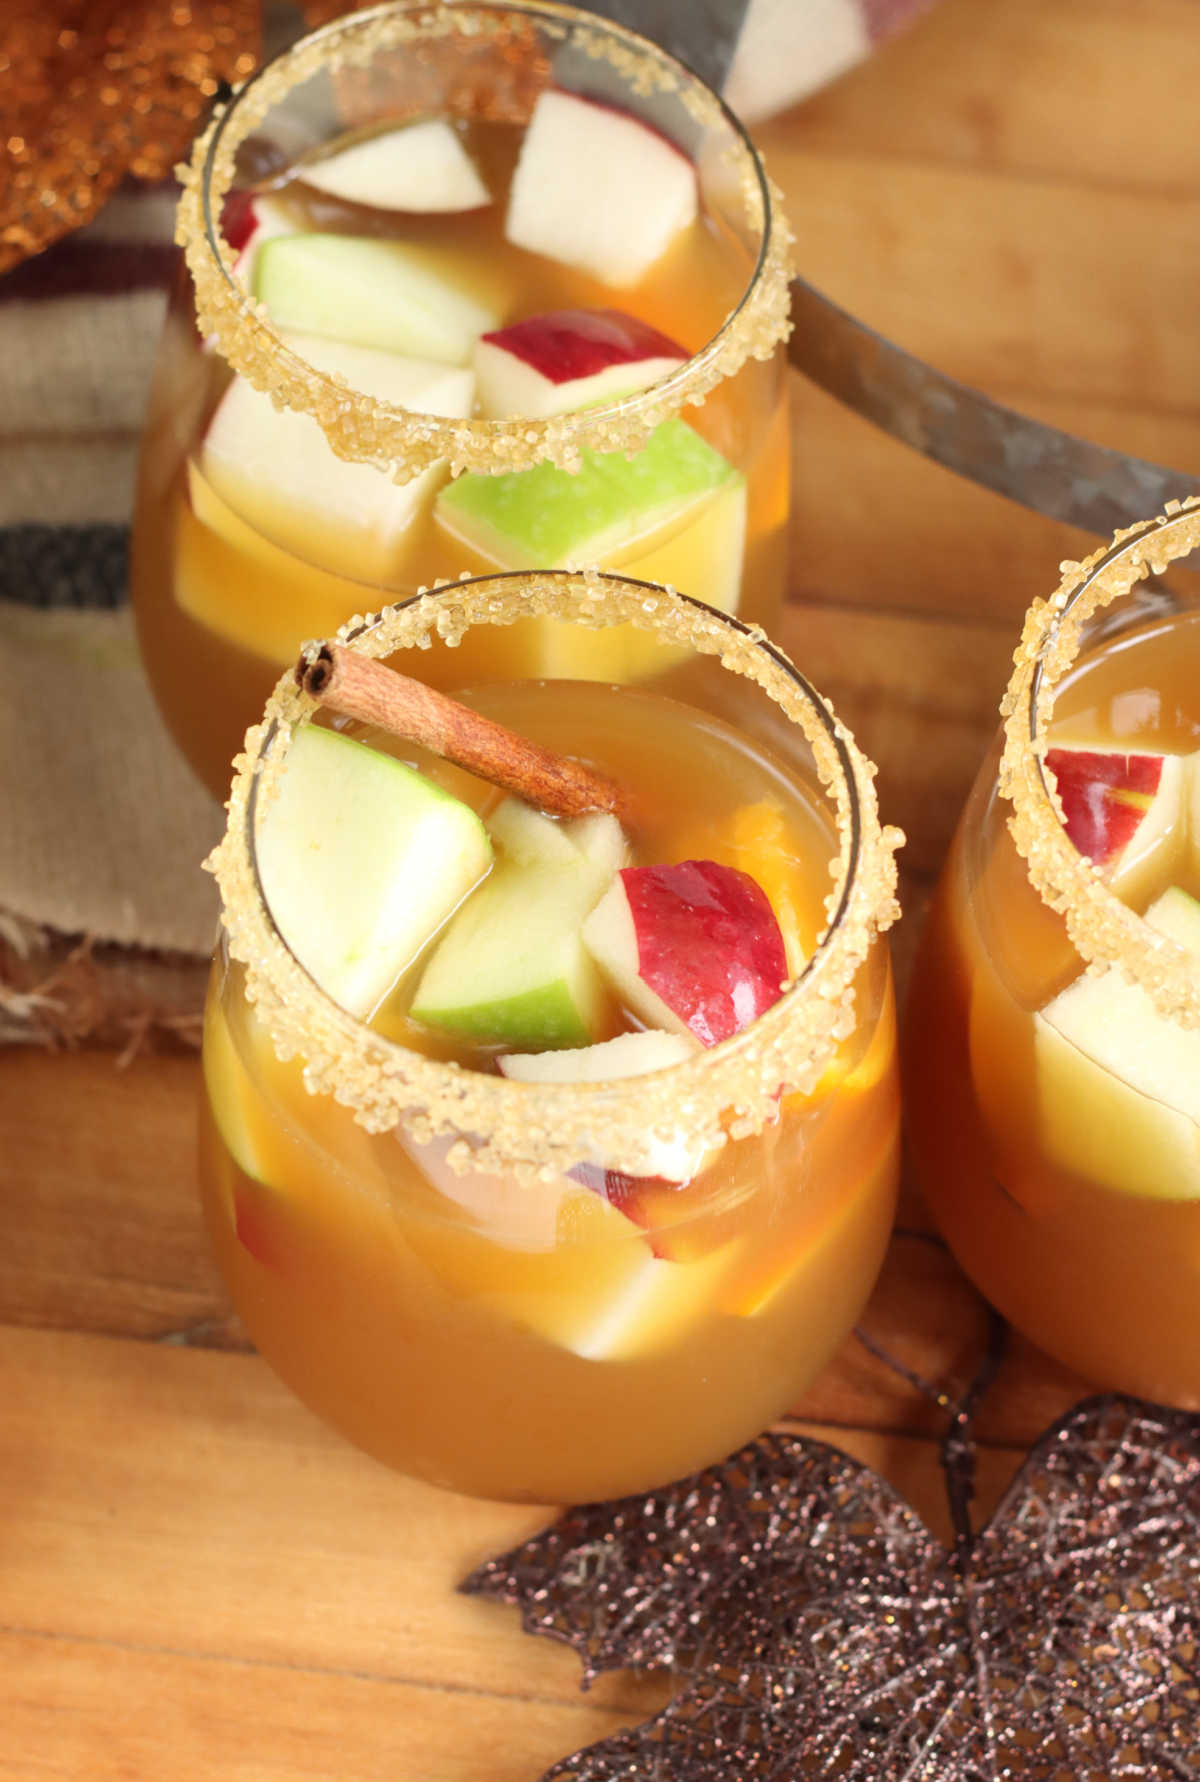 Stemless wine glasses with cider sangria, red and green apple chunks, oranges, cinnamon sticks, rims with raw sugar.